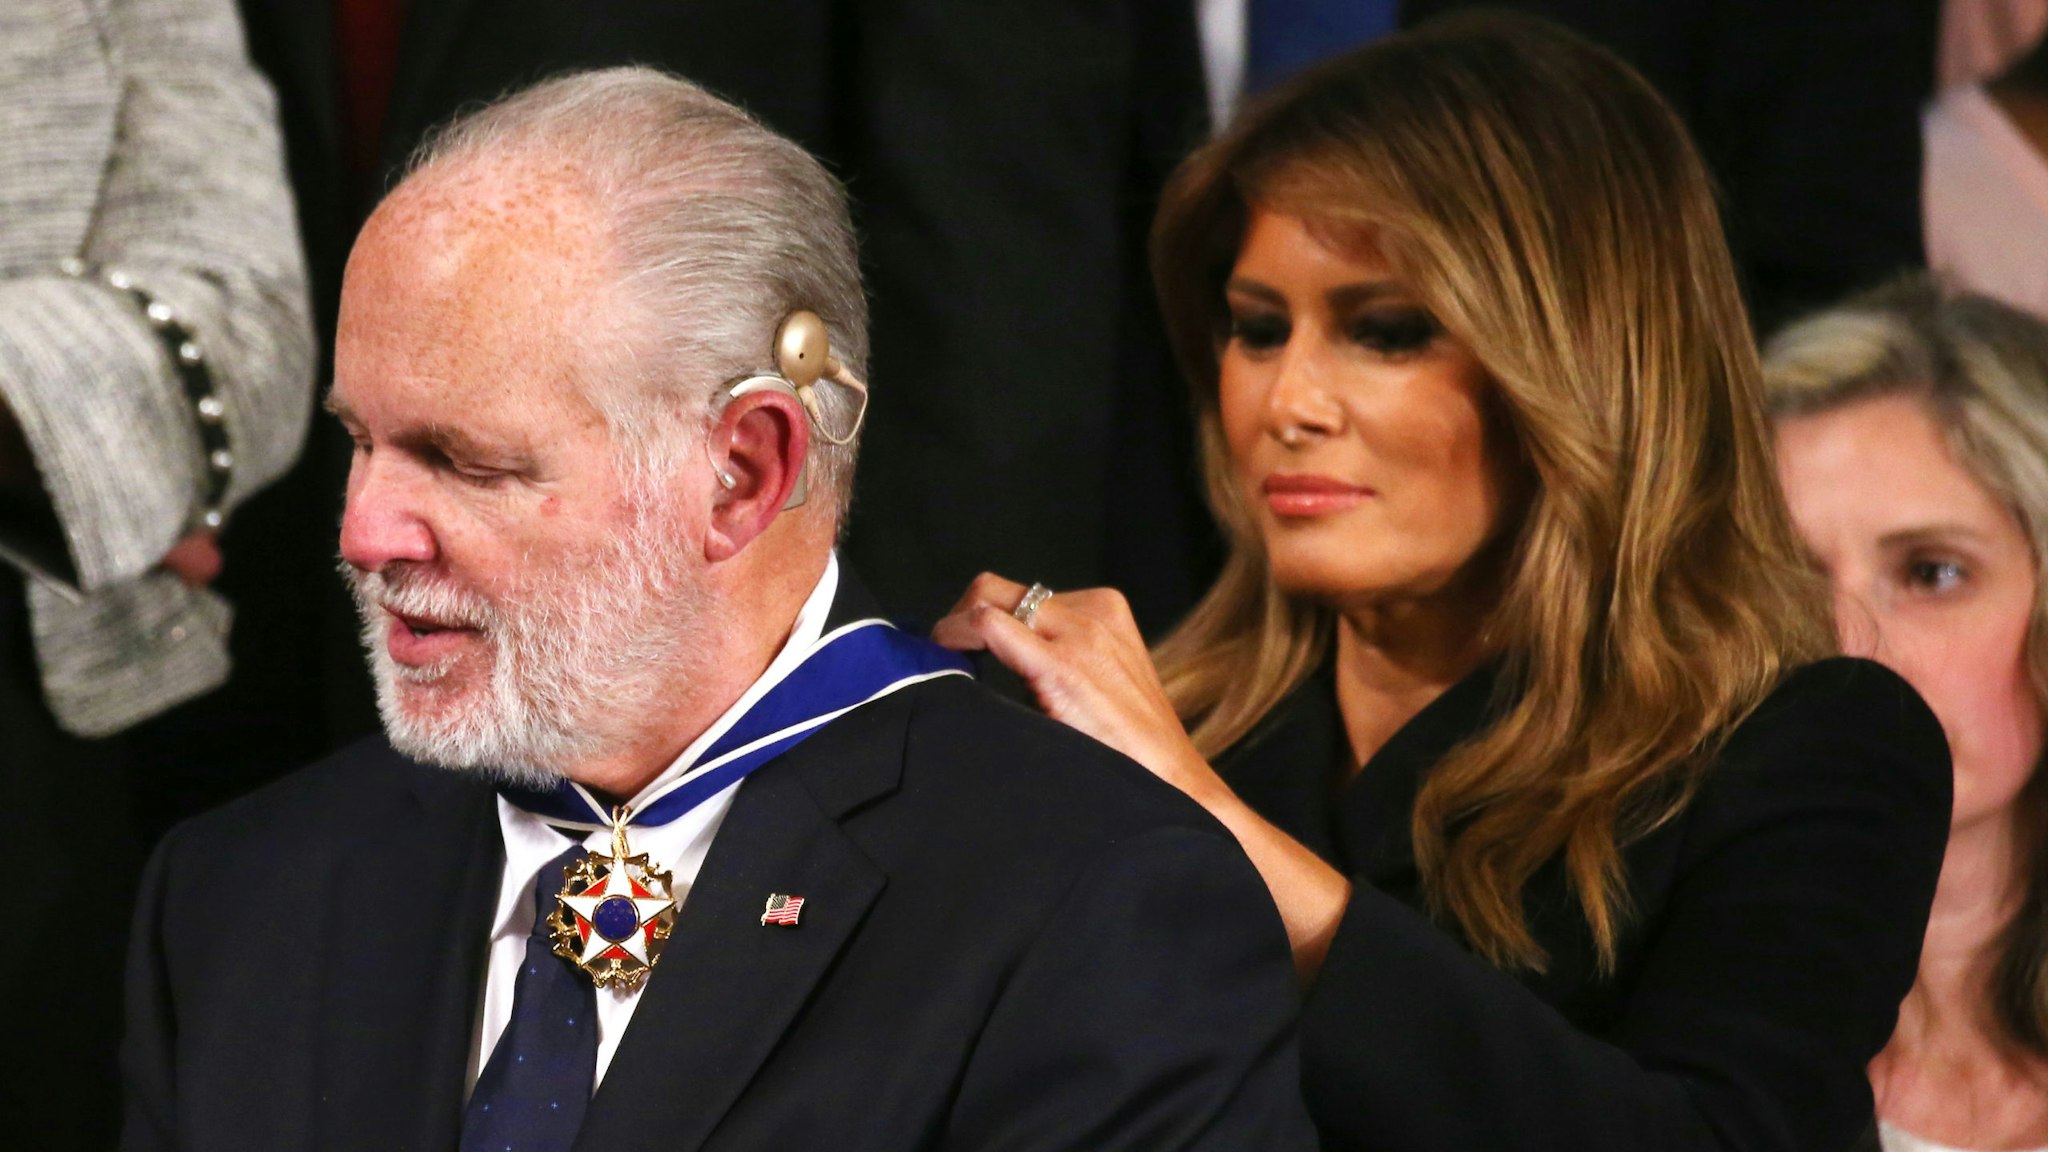 WASHINGTON, DC - FEBRUARY 04: Radio personality Rush Limbaugh reacts as First Lady Melania Trump gives him the Presidential Medal of Freedom during the State of the Union address in the chamber of the U.S. House of Representatives on February 04, 2020 in Washington, DC. President Trump delivers his third State of the Union to the nation the night before the U.S. Senate is set to vote in his impeachment trial.